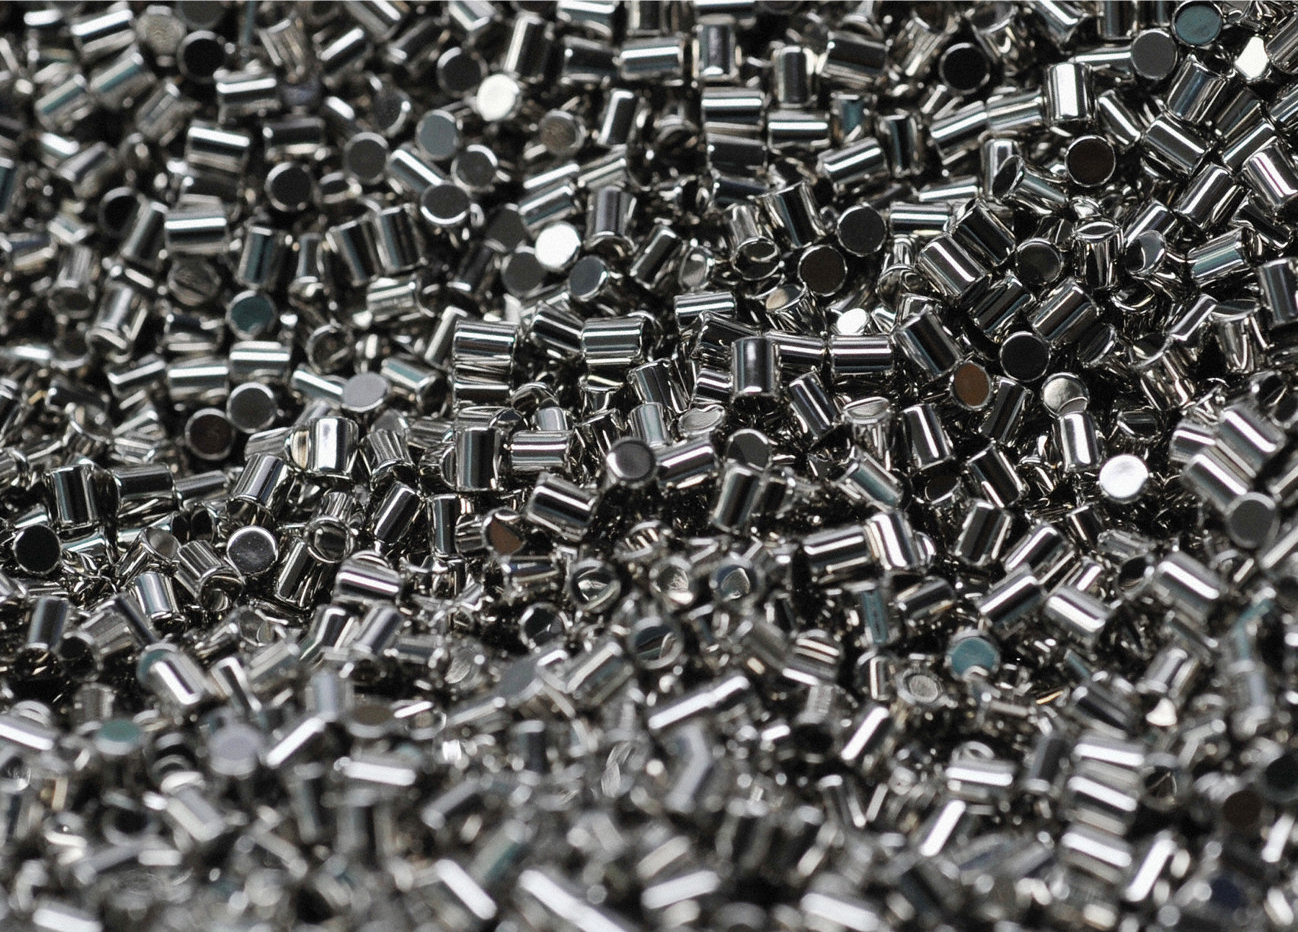 Hitachi Metals holds more than 600 patents for rare-earth magnets globally. Photo: AP